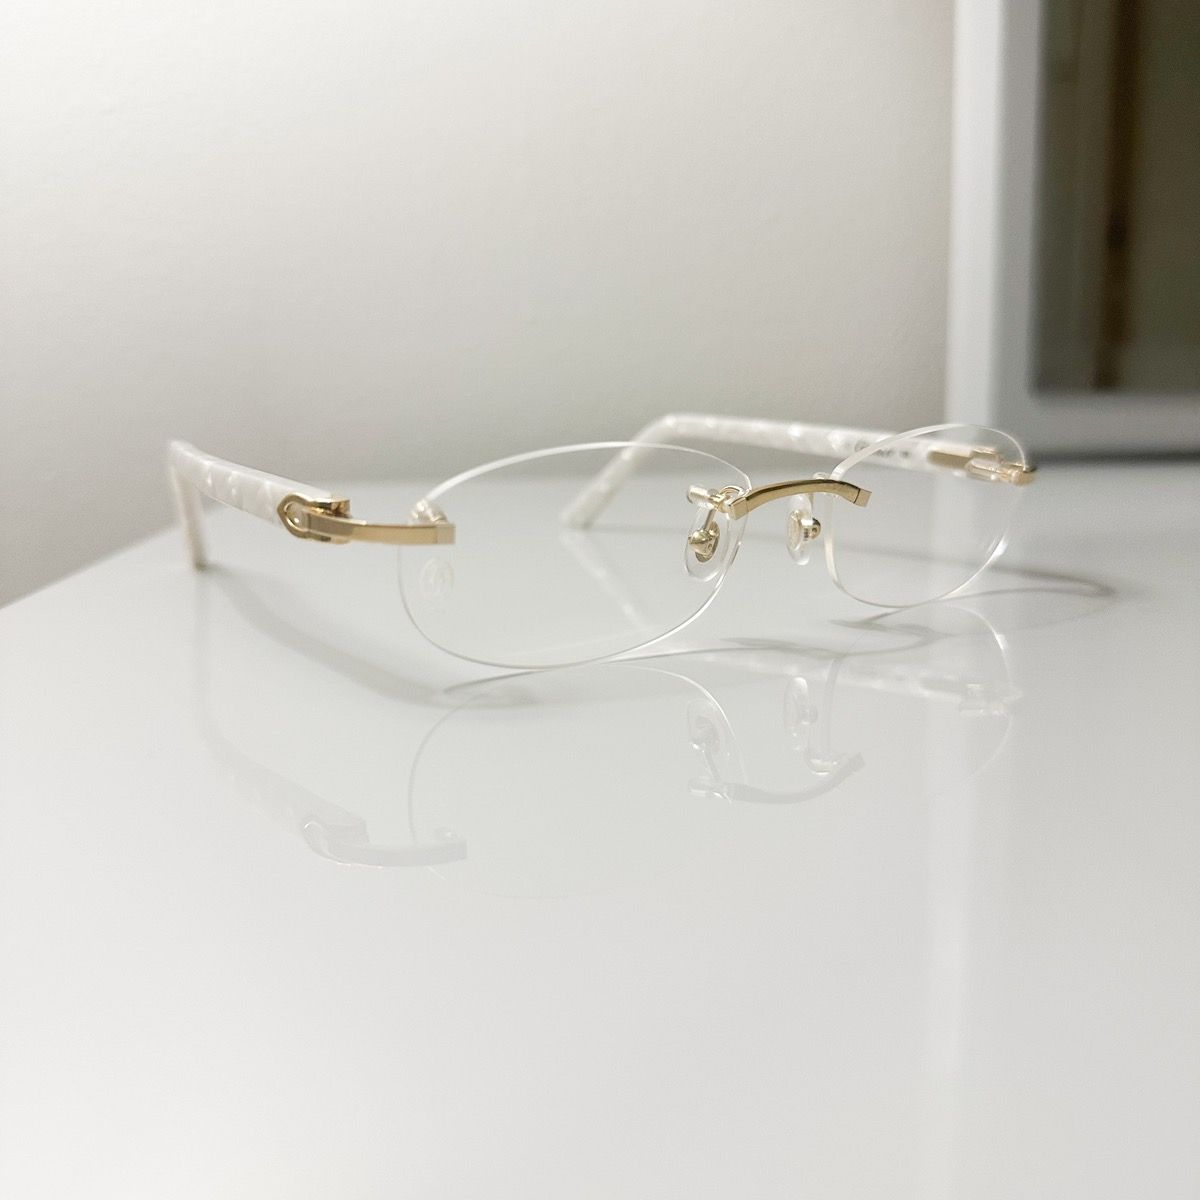 Pre-owned Cartier C Decor Rimless Gold/pearl Glasses